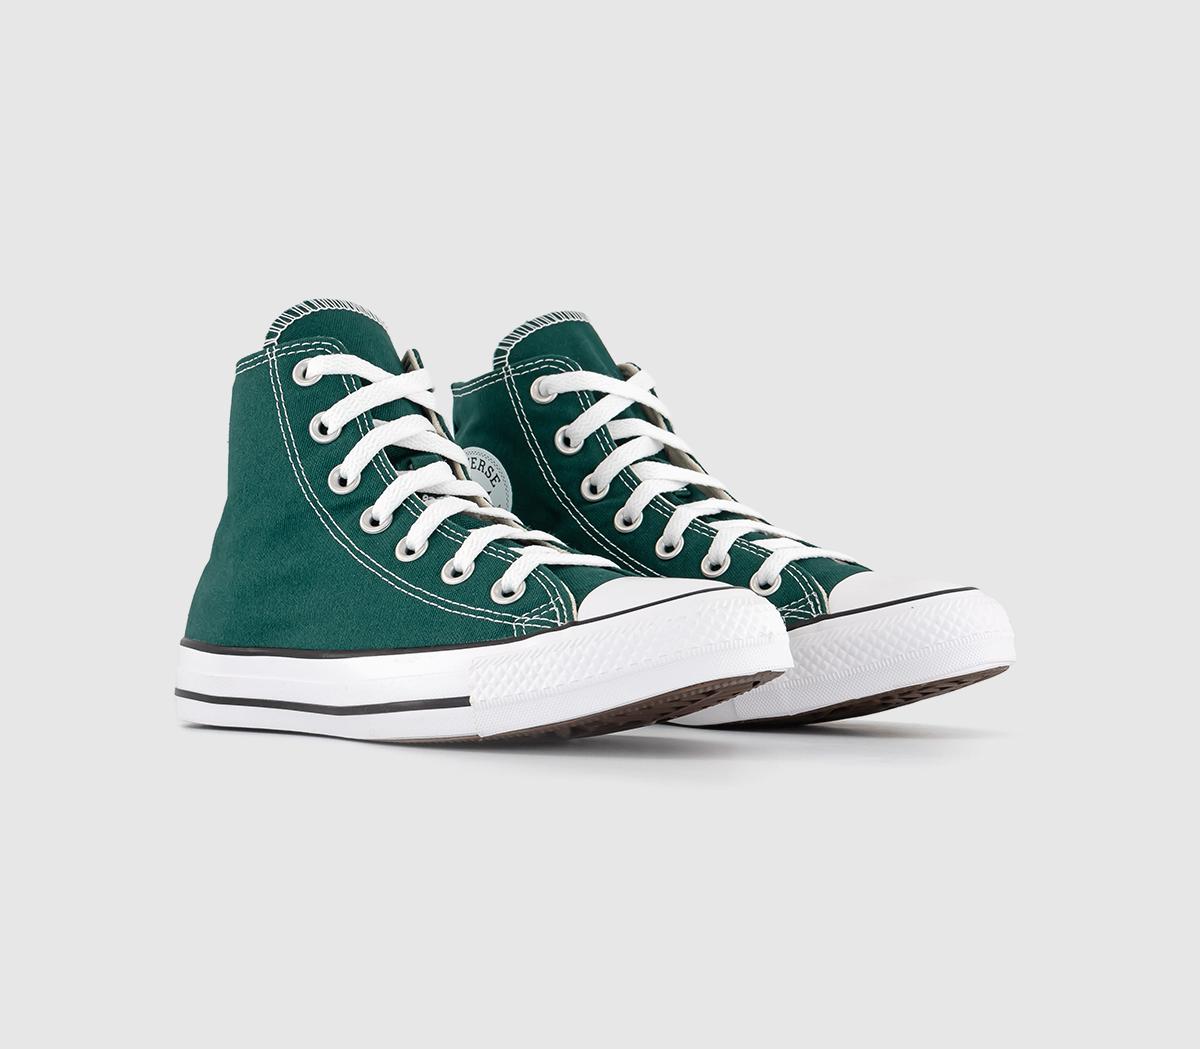 Converse All Star Hi Trainers Dragon Scale Green, 7